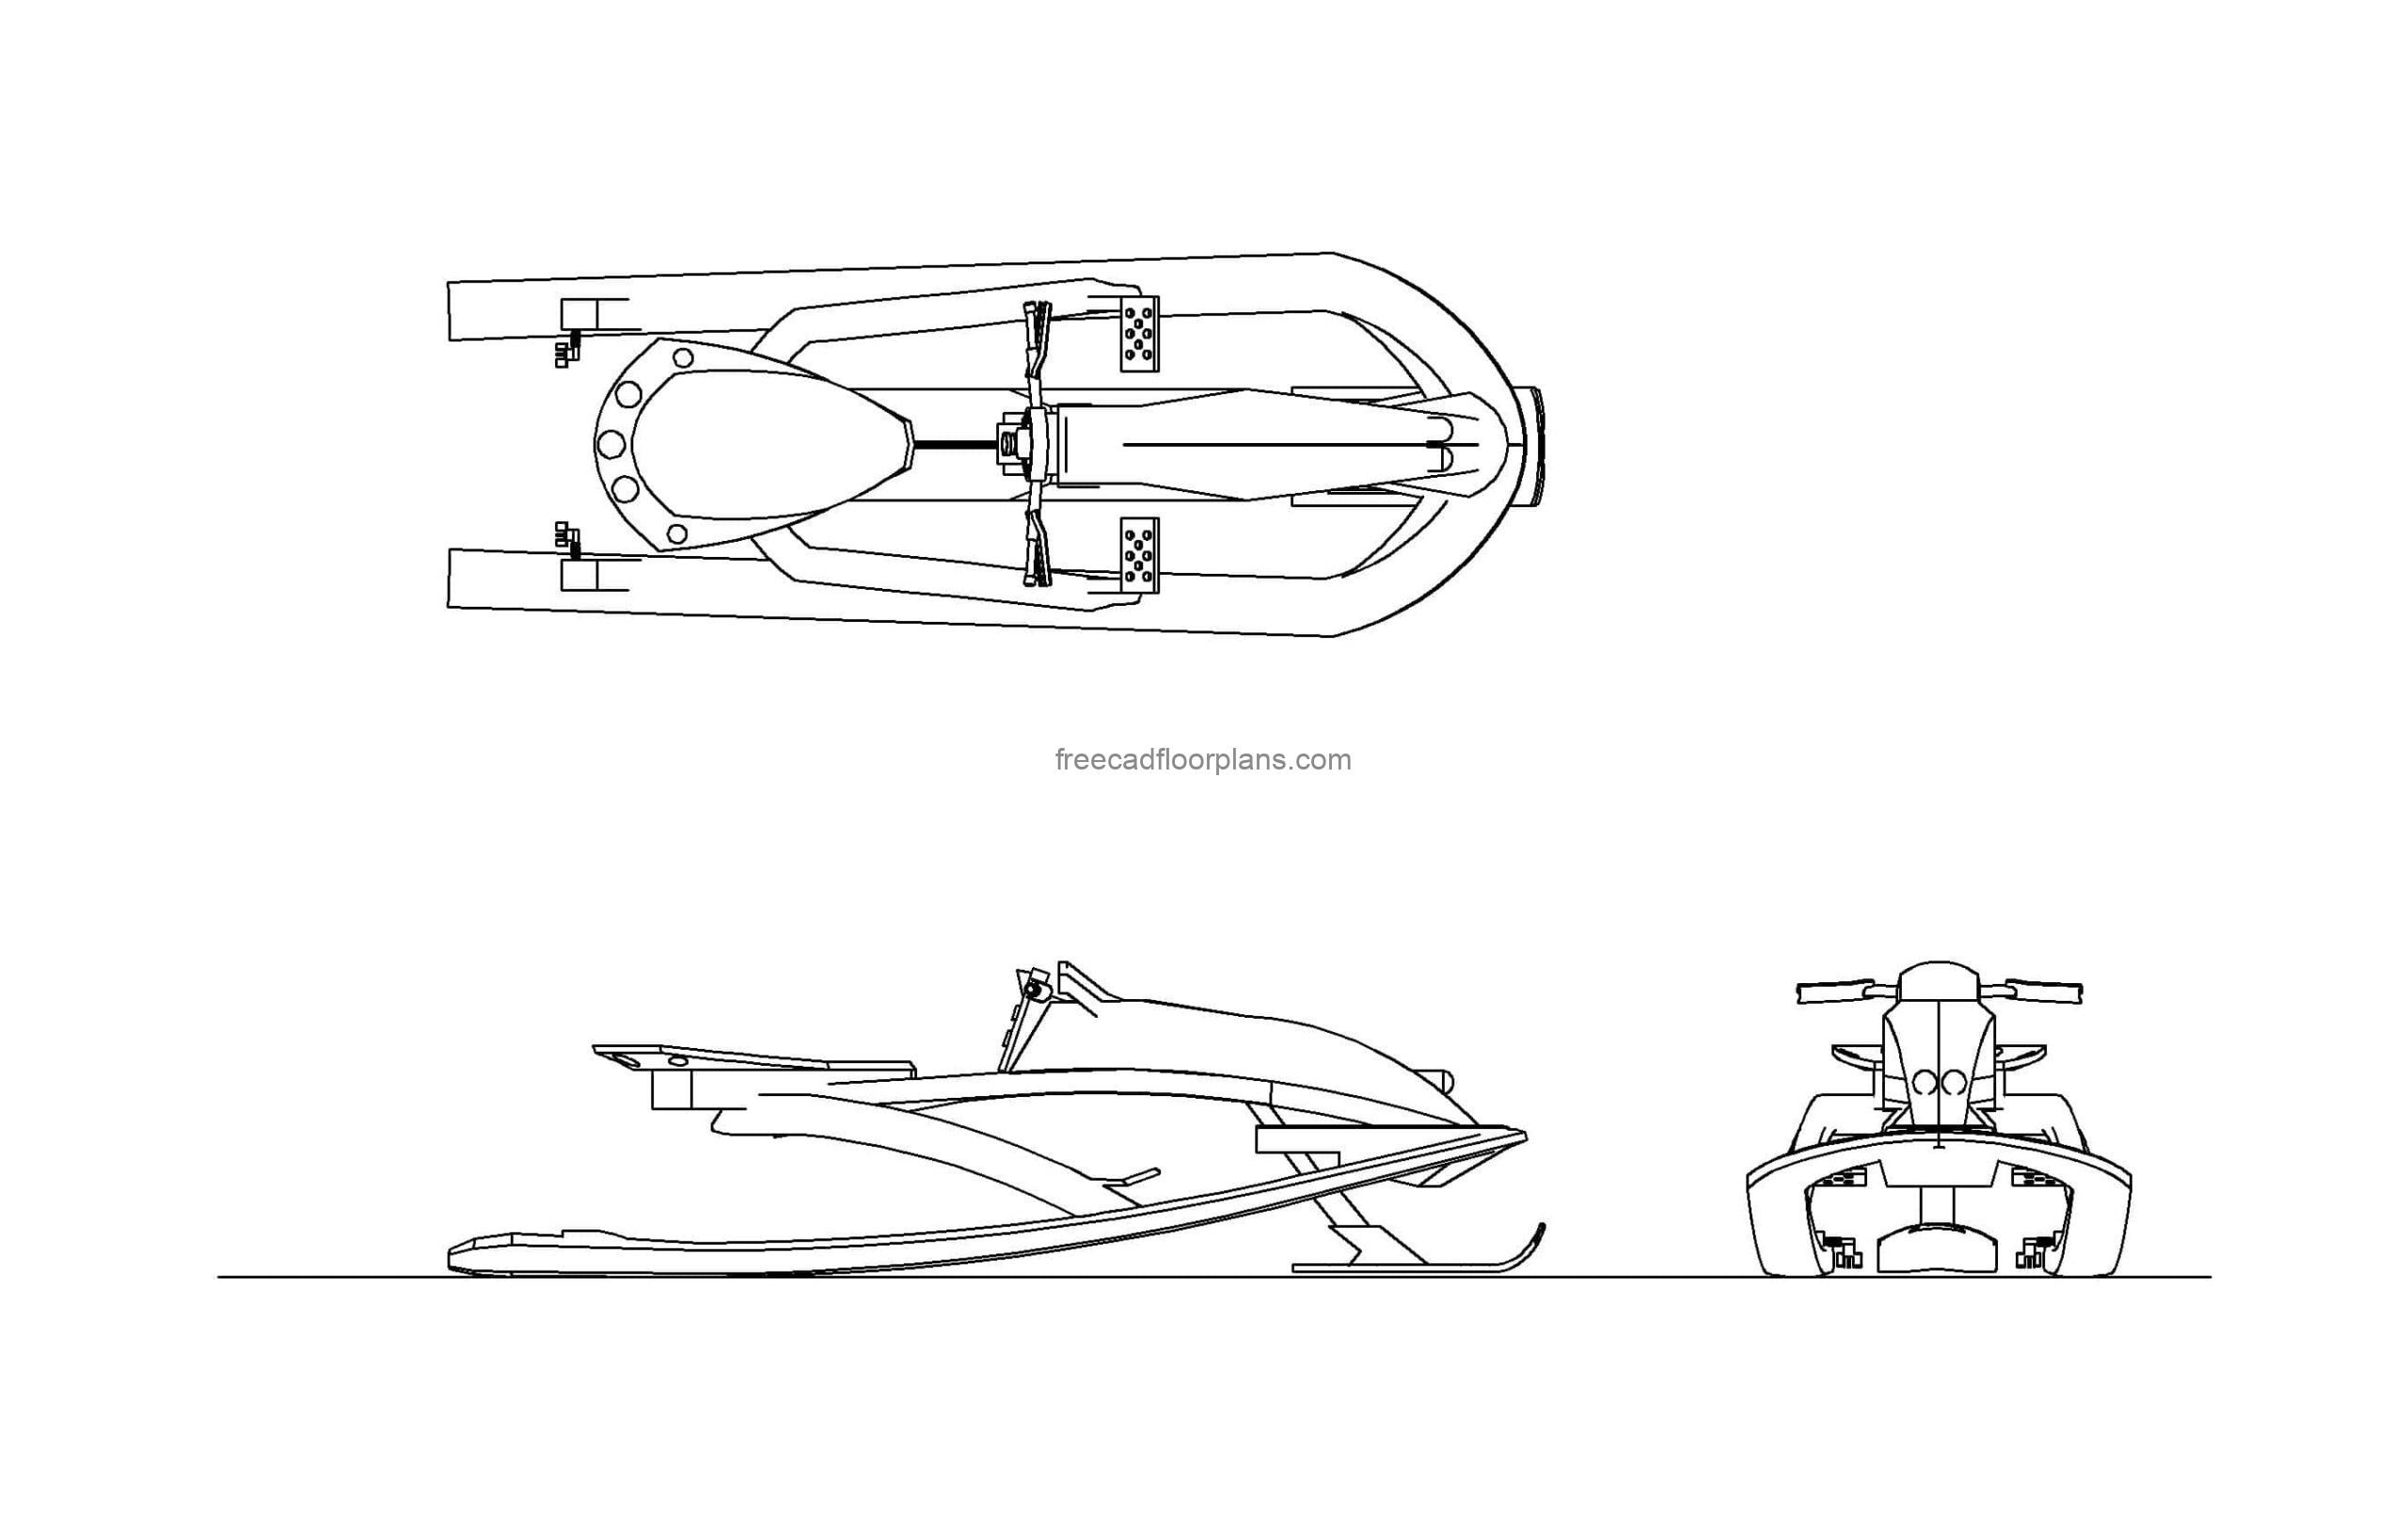 snowmobile autocad drawing with all 2d views, plan and elevation, dwg file for free download